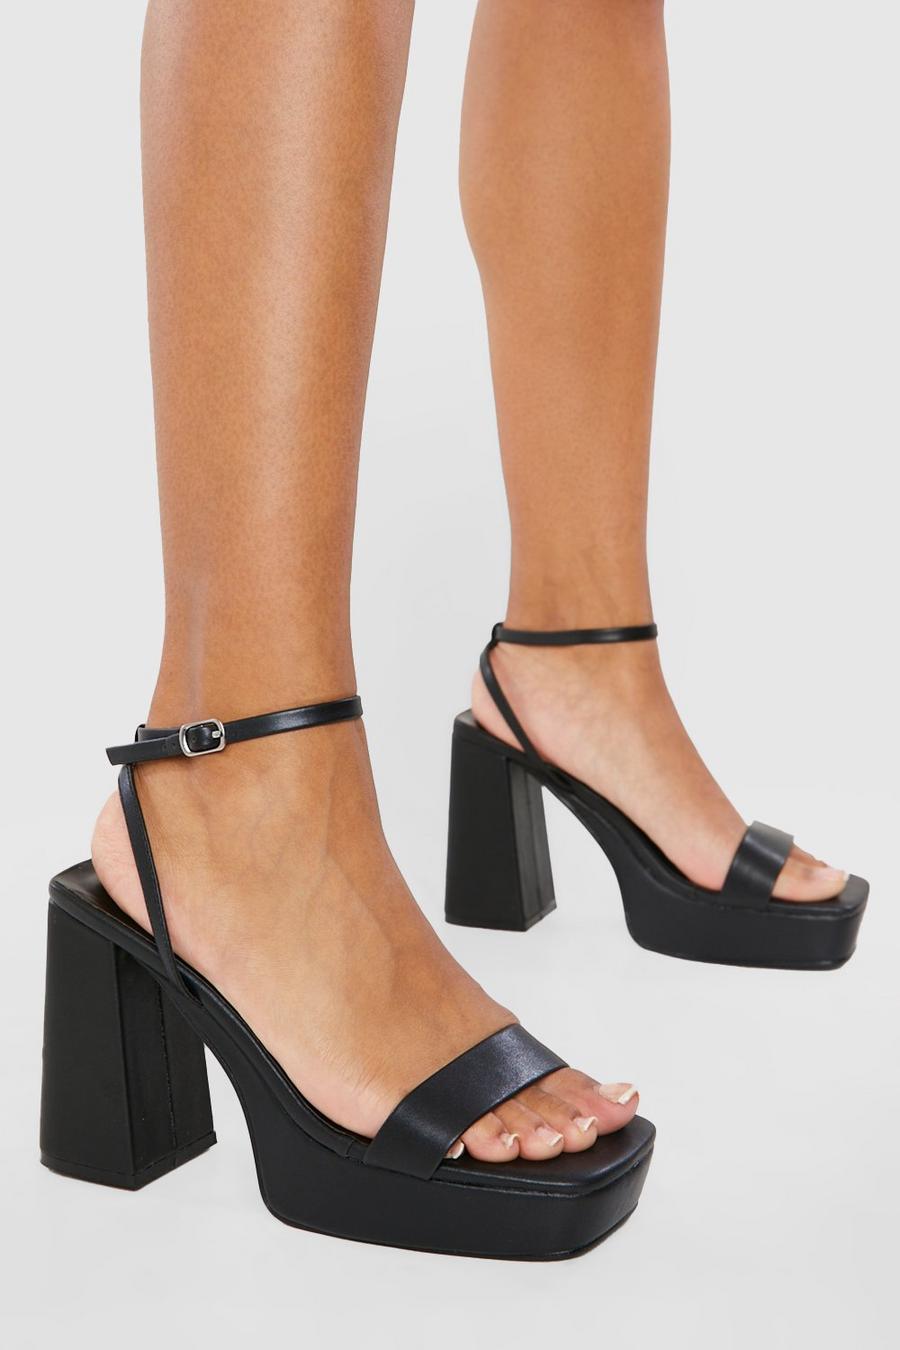 Black Wide Fit Square Toe Barely There Platform Heel 